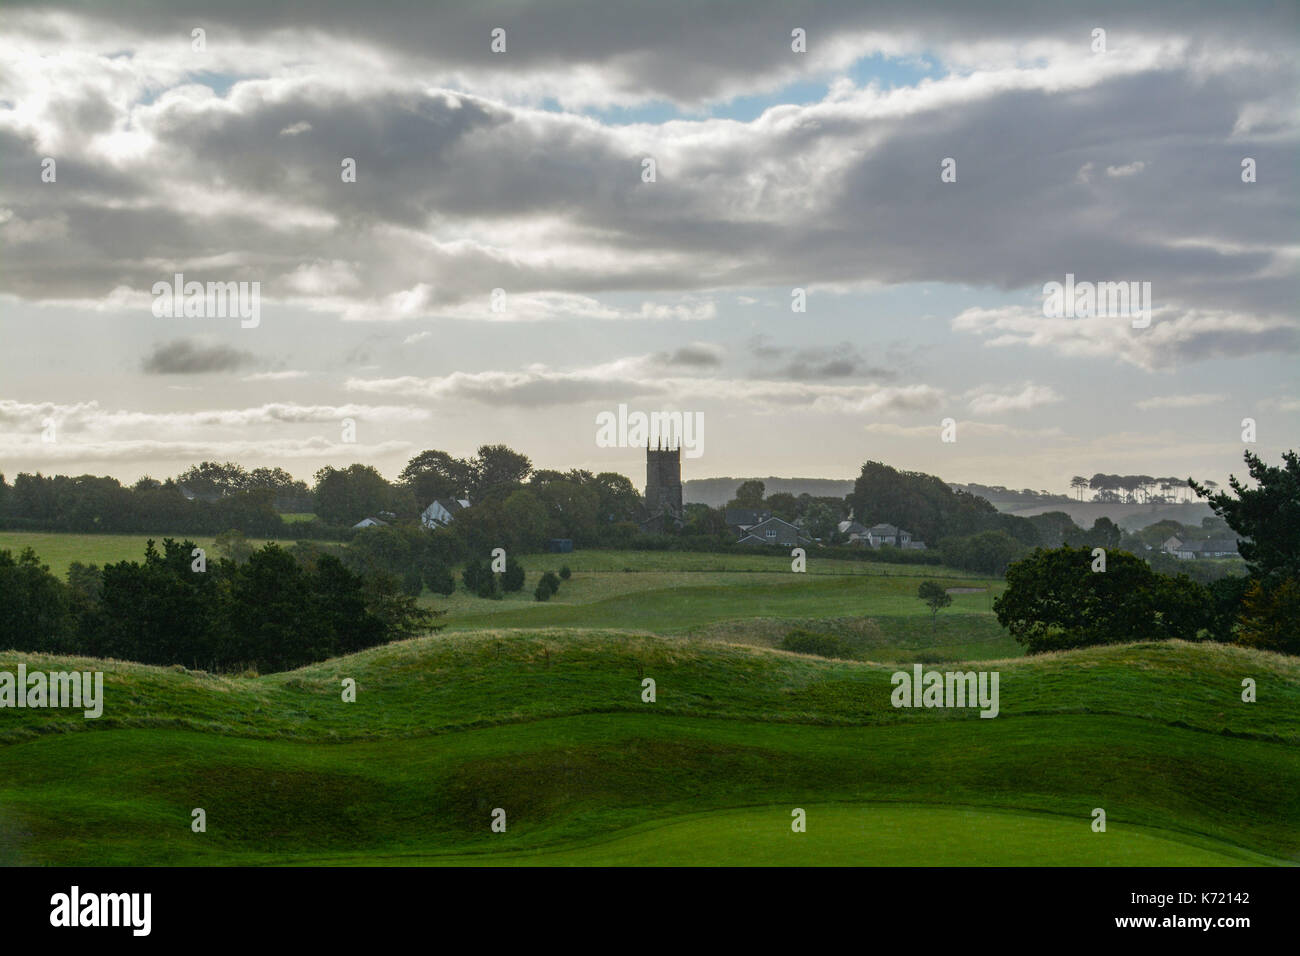 St Mellion, Cornwall, UK. 14th Sep, 2017. UK Weather. It's going to be a day of sunshine and showers for the golfers at St Mellion today. Credit: Simon Maycock/Alamy Live News Stock Photo